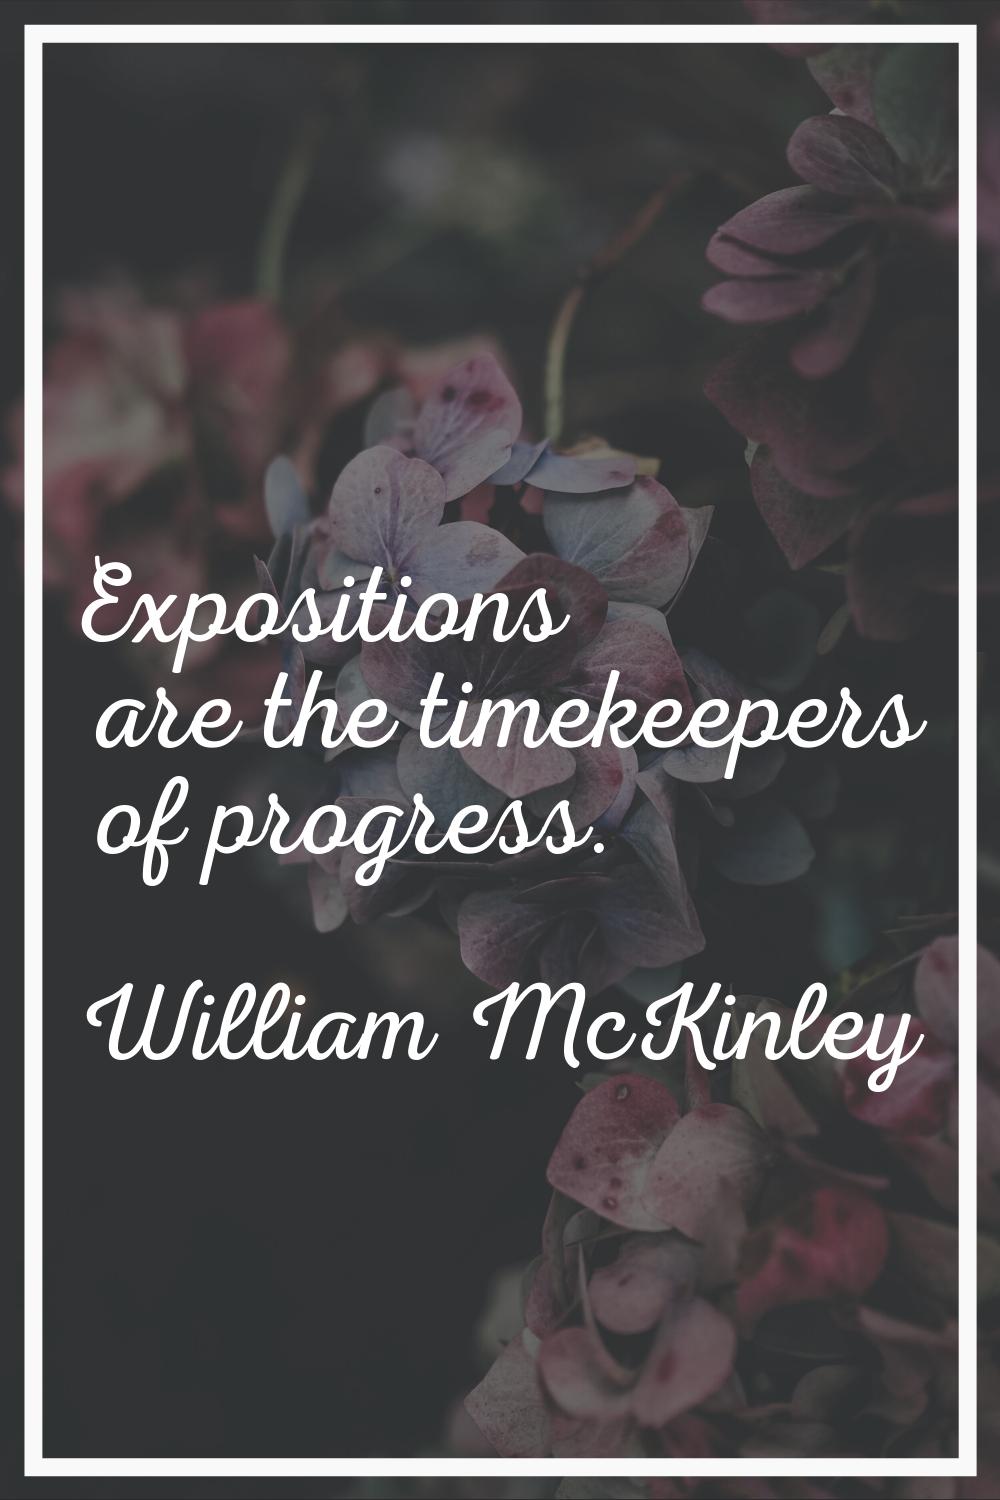 Expositions are the timekeepers of progress.